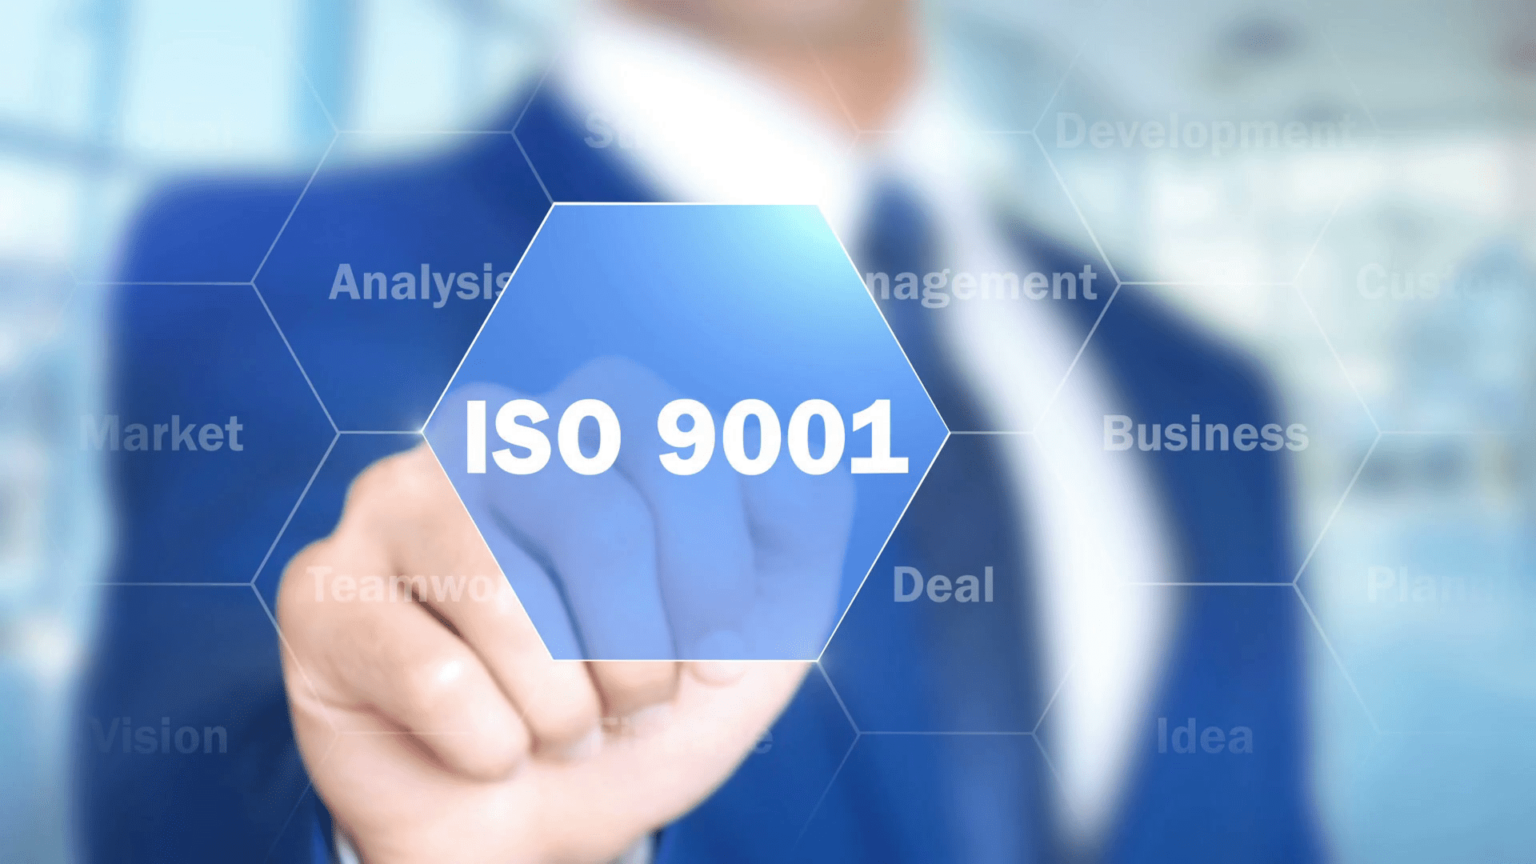 ISO 9001 | Quality Management System Certification | Inzinc Consulting